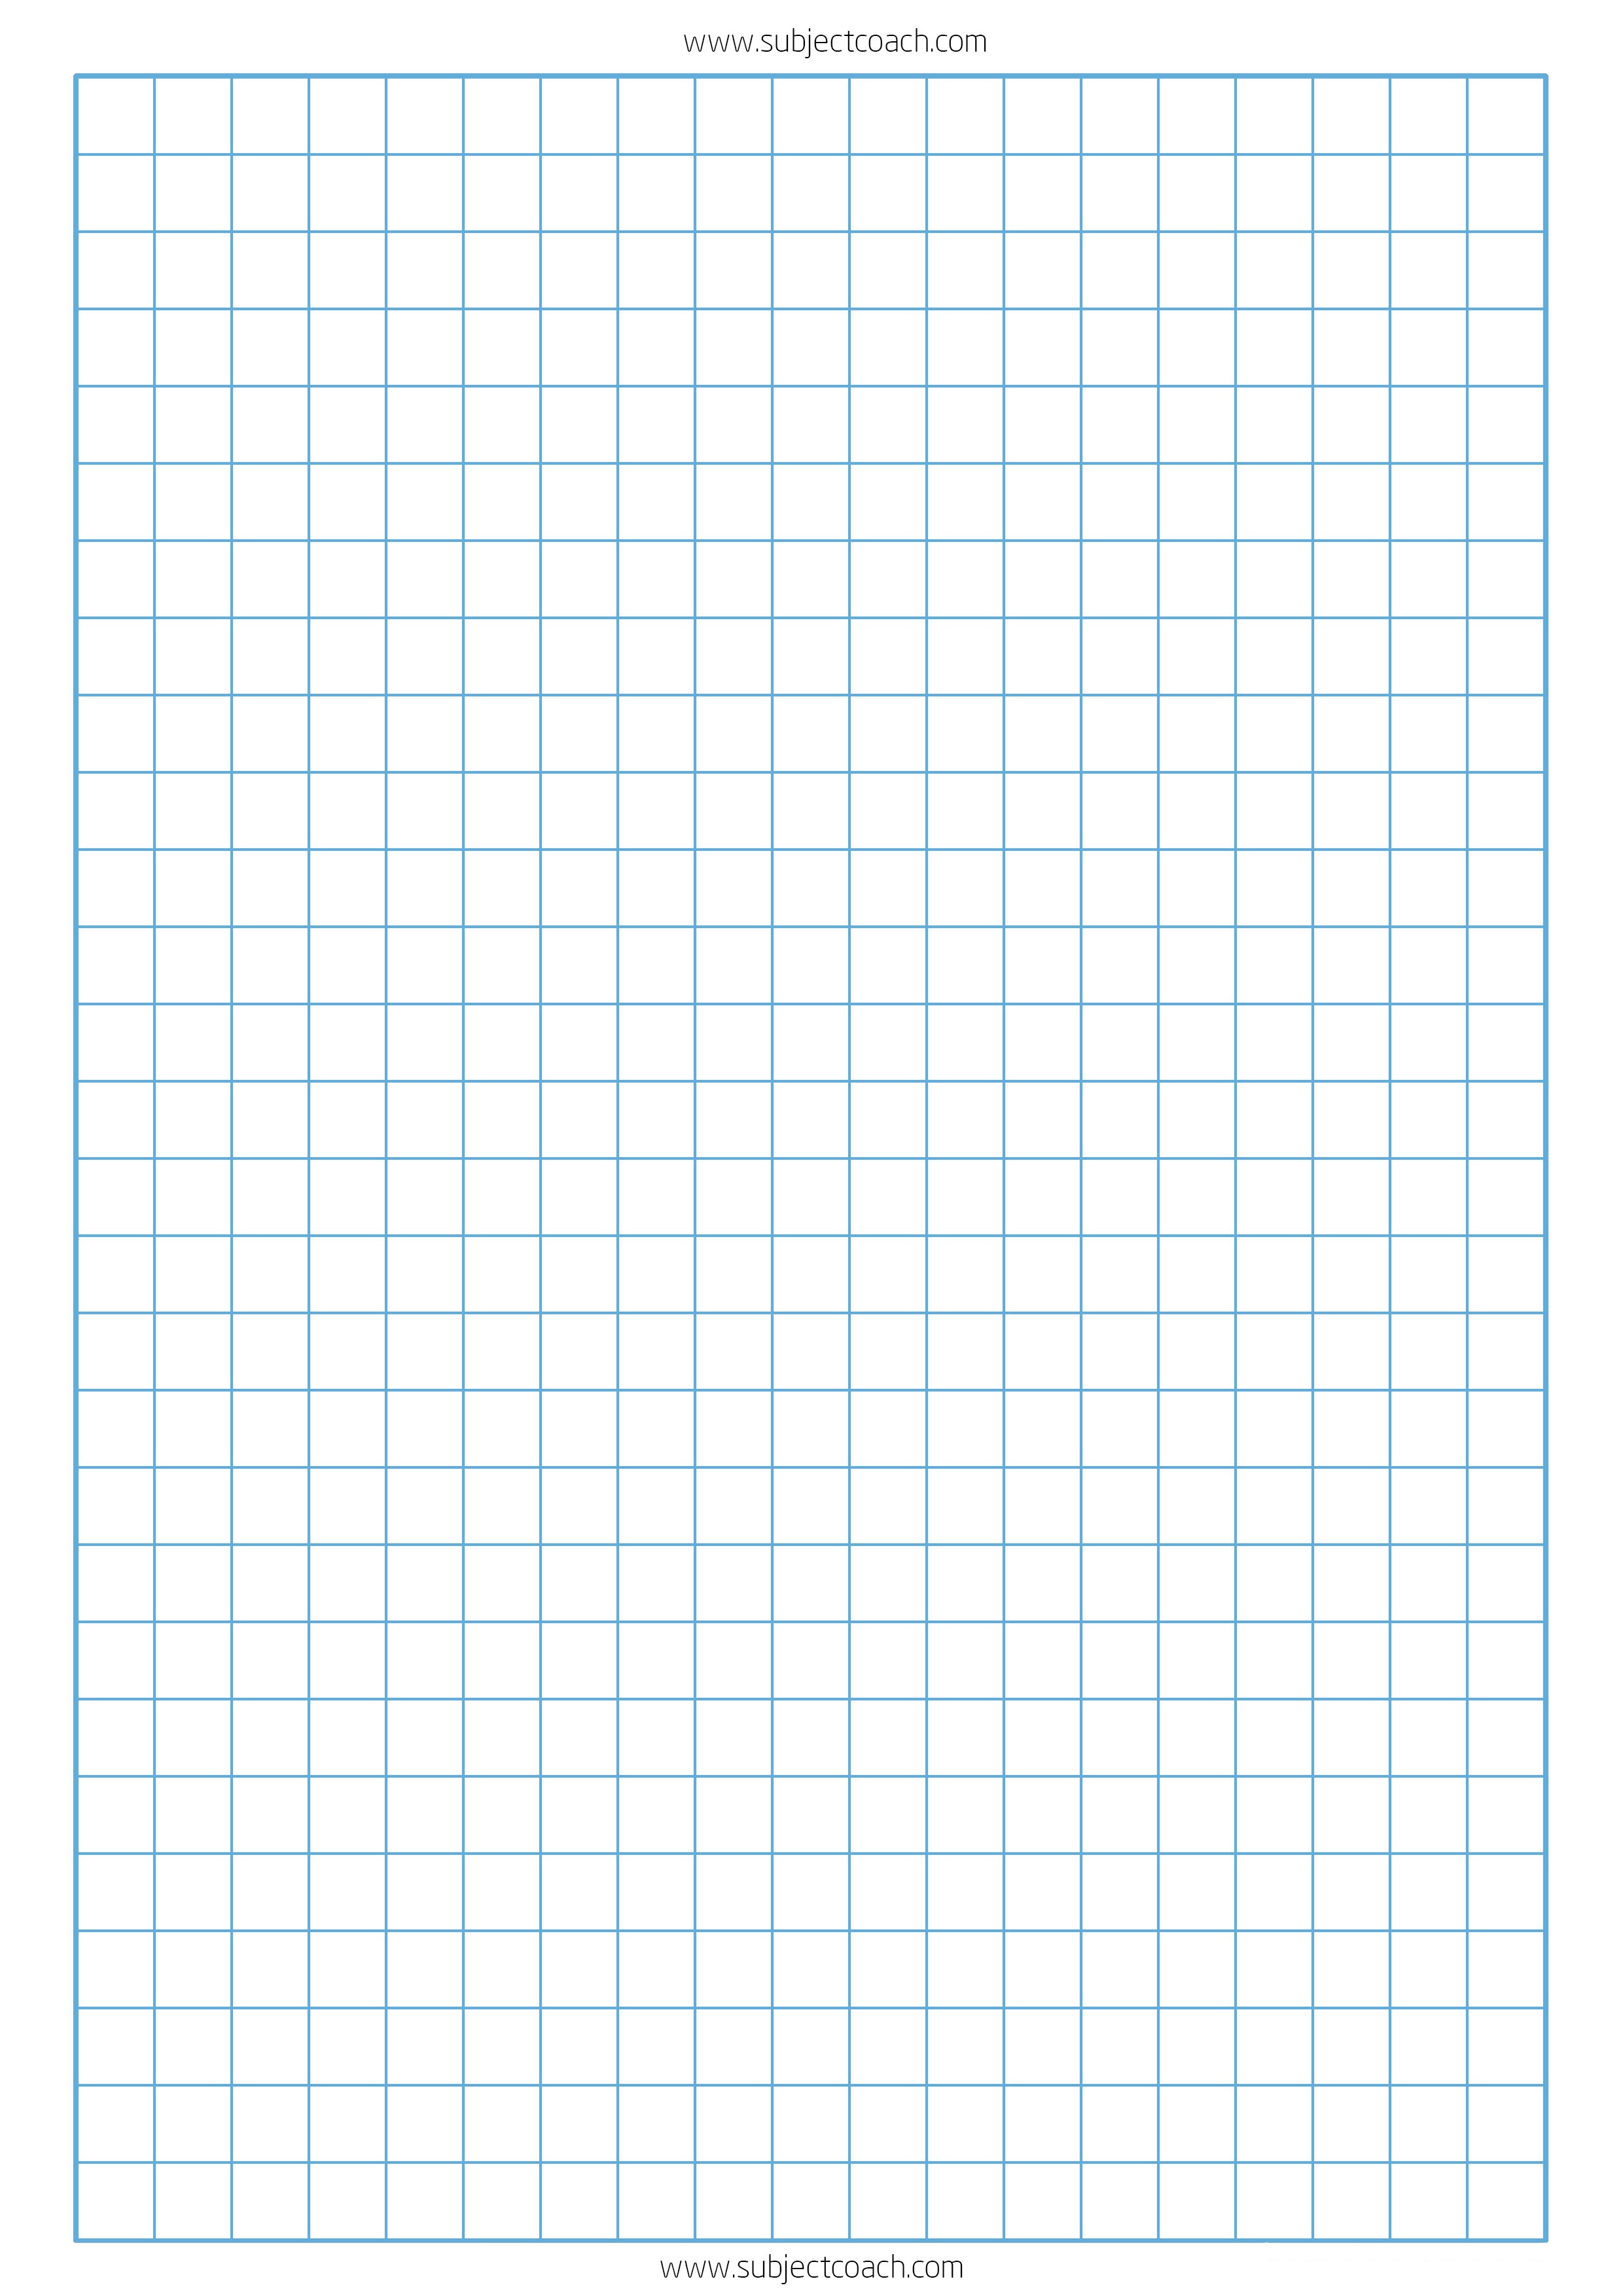 Free Printable Graph Paper 1Cm For A4 Paper | Subjectcoach - Free Printable Graph Paper